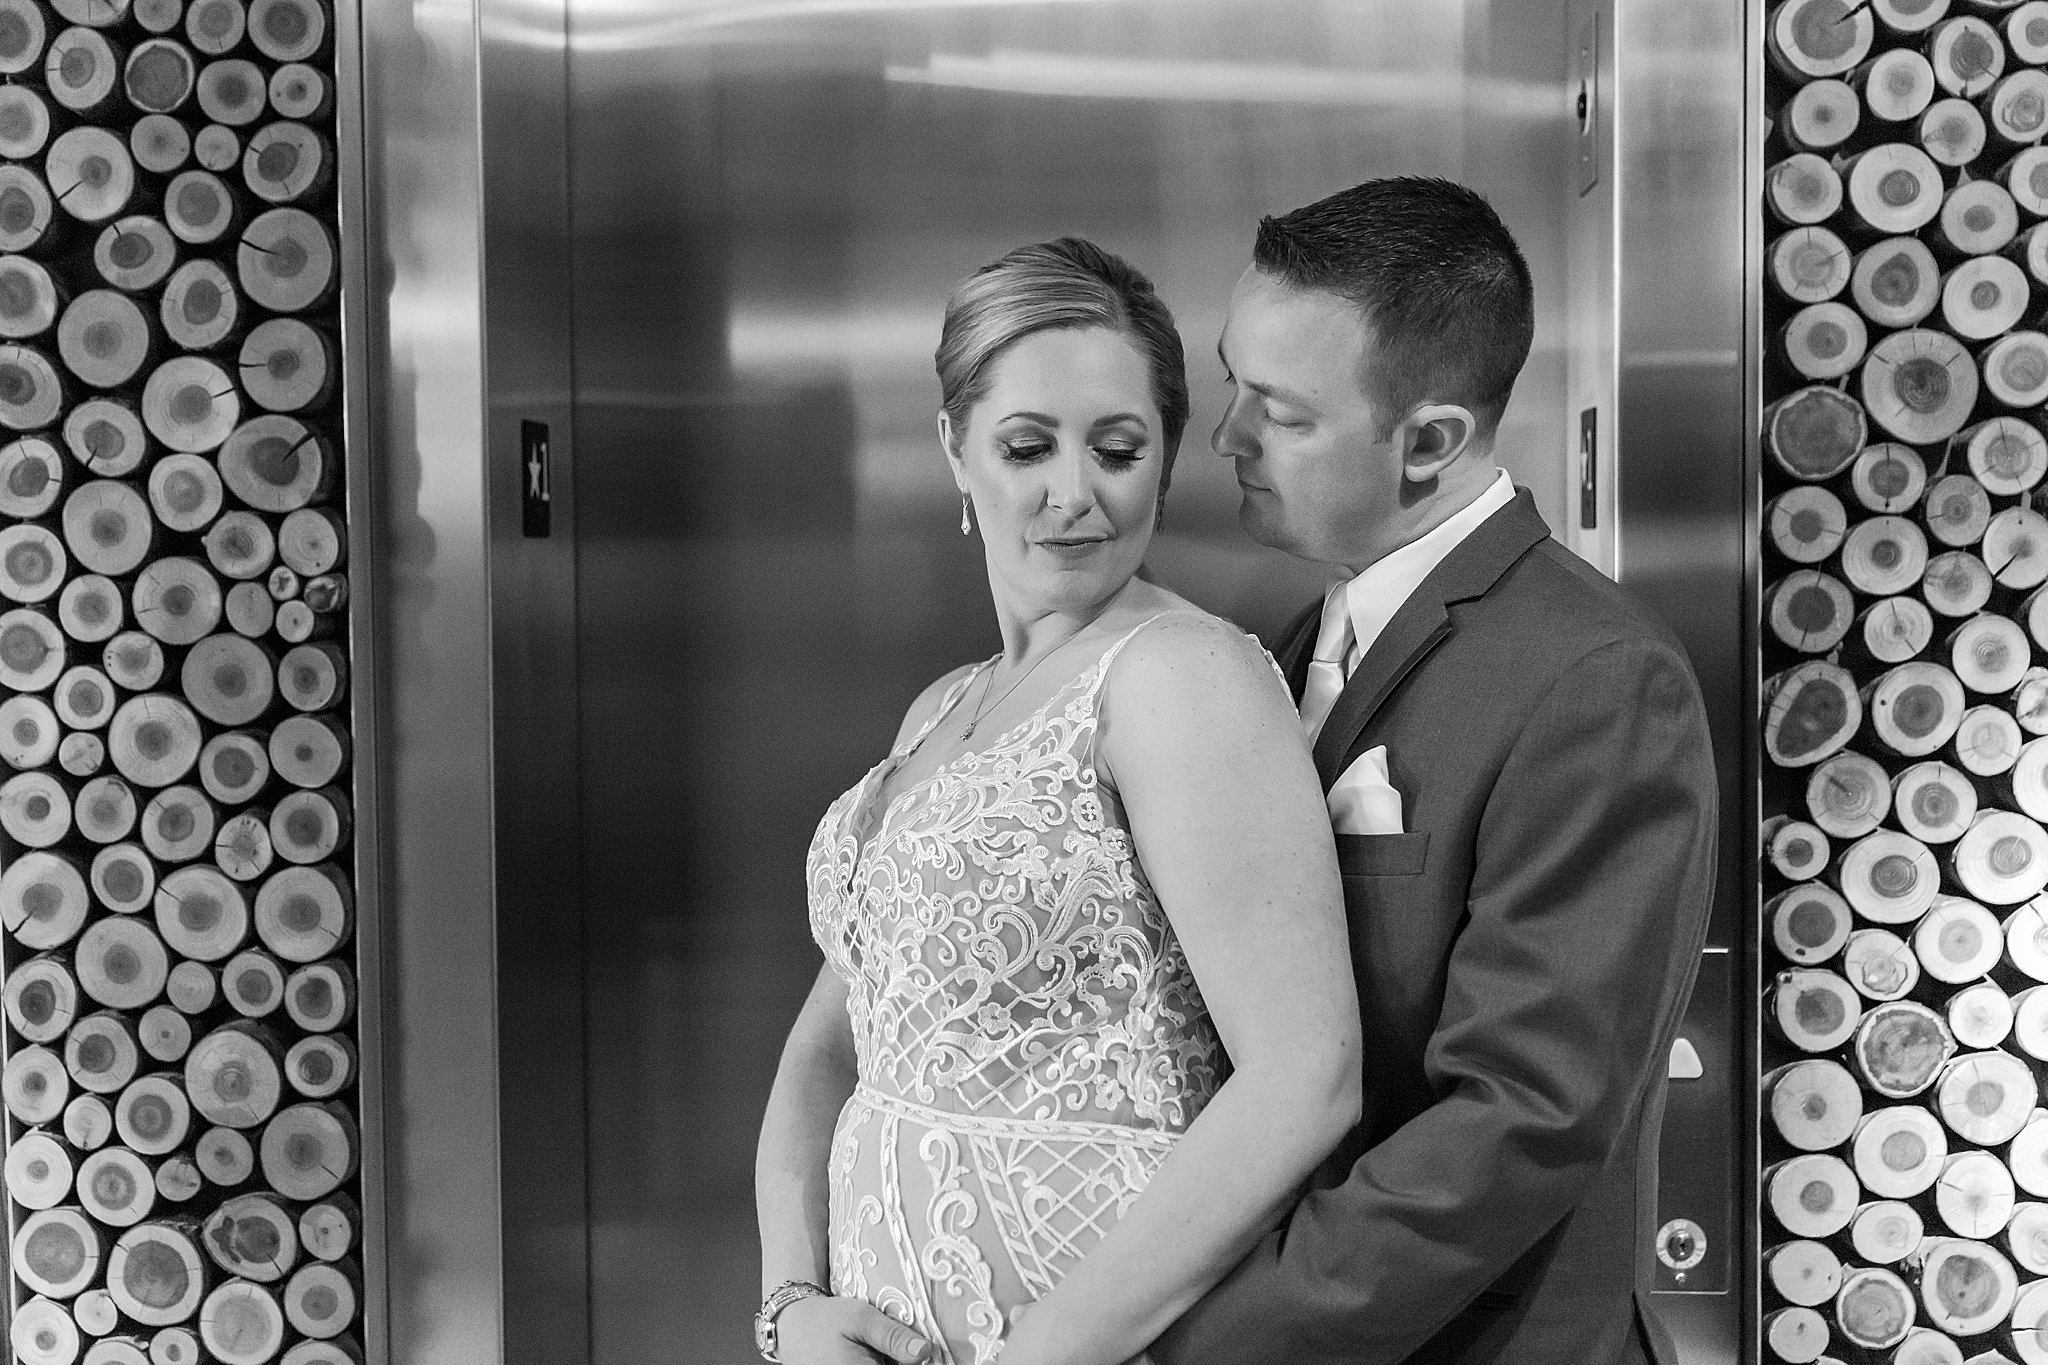 modern-romantic-wedding-photography-at-webers-in-ann-arbor-michigan-by-courtney-carolyn-photography_0044.jpg